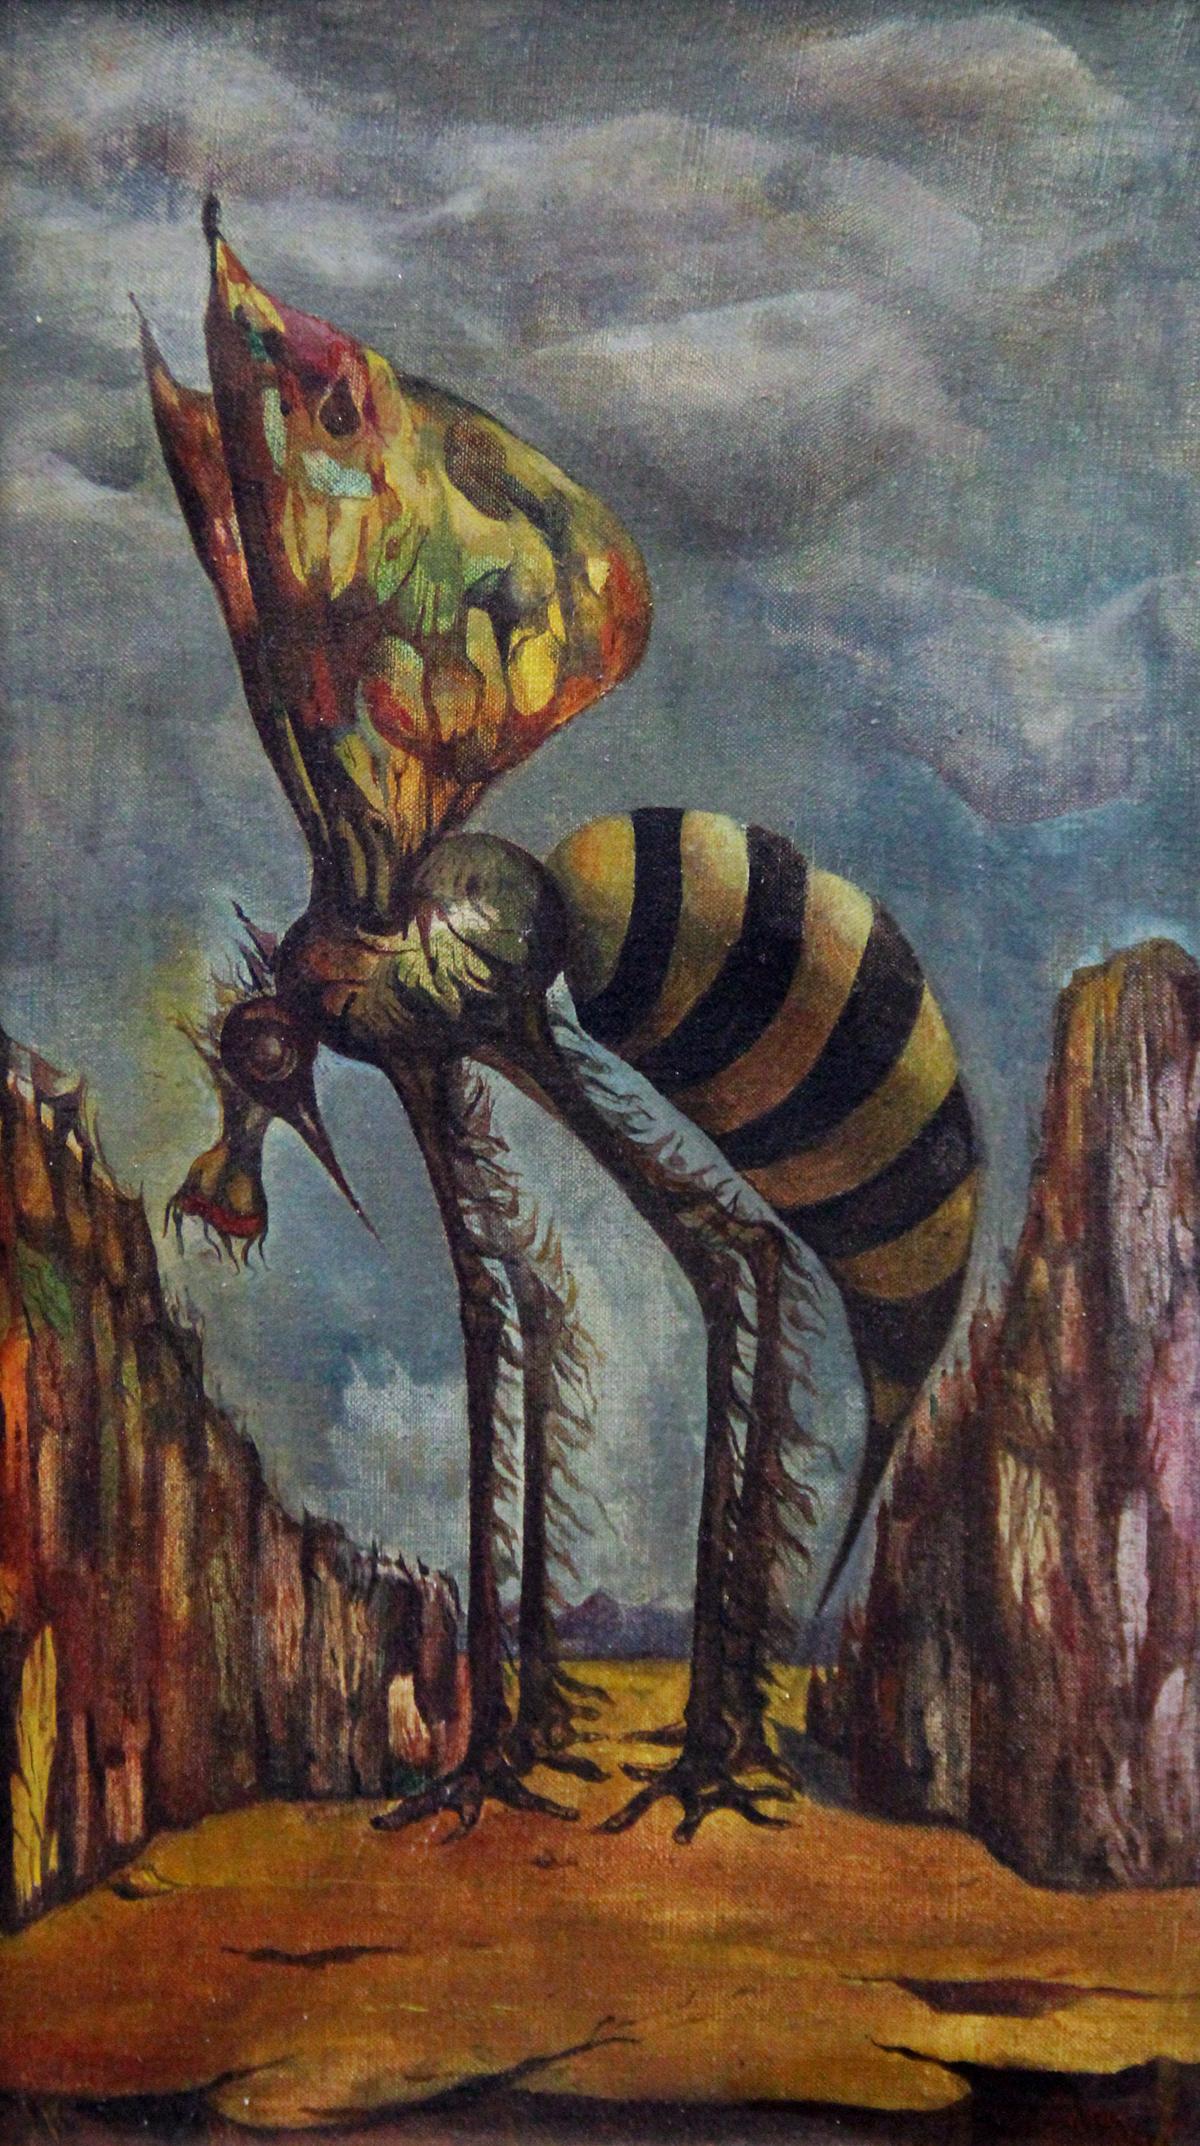 Mosquito on Orange Mountain, Surrealist Landscape, Oil on Canvas, 1943, Framed - Painting by Leon Kelly